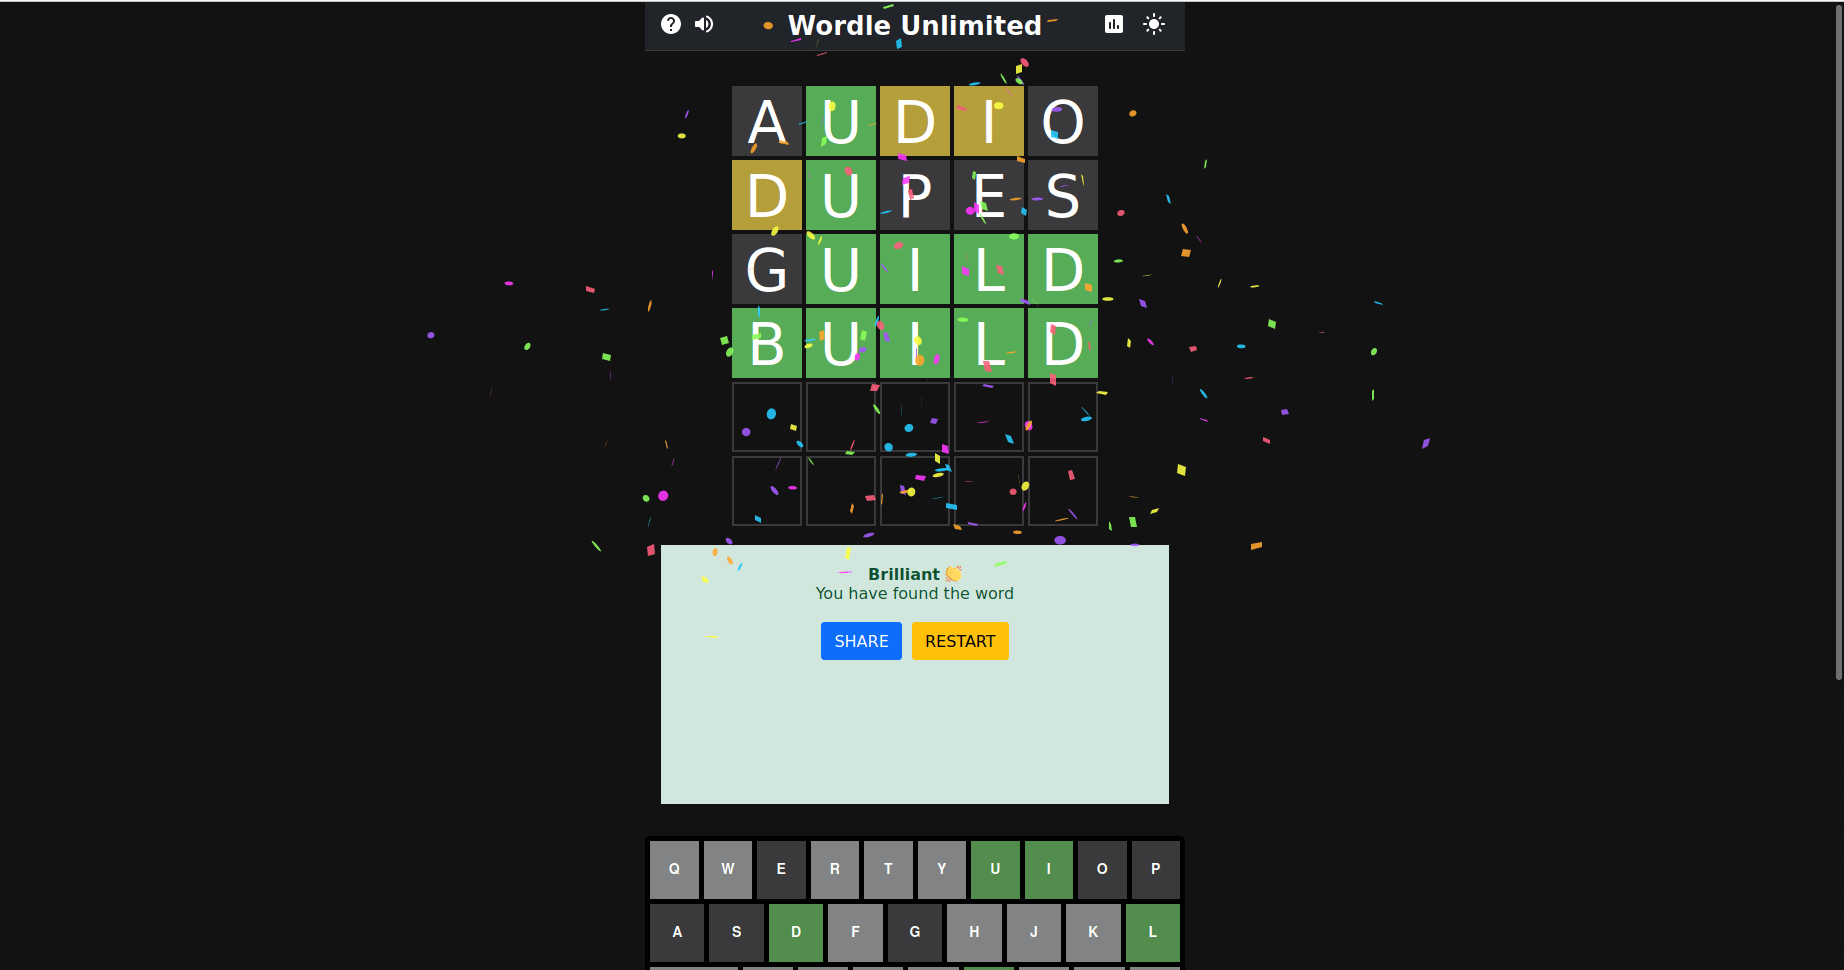 How To Play Wordle Unlimited Without Difficulty